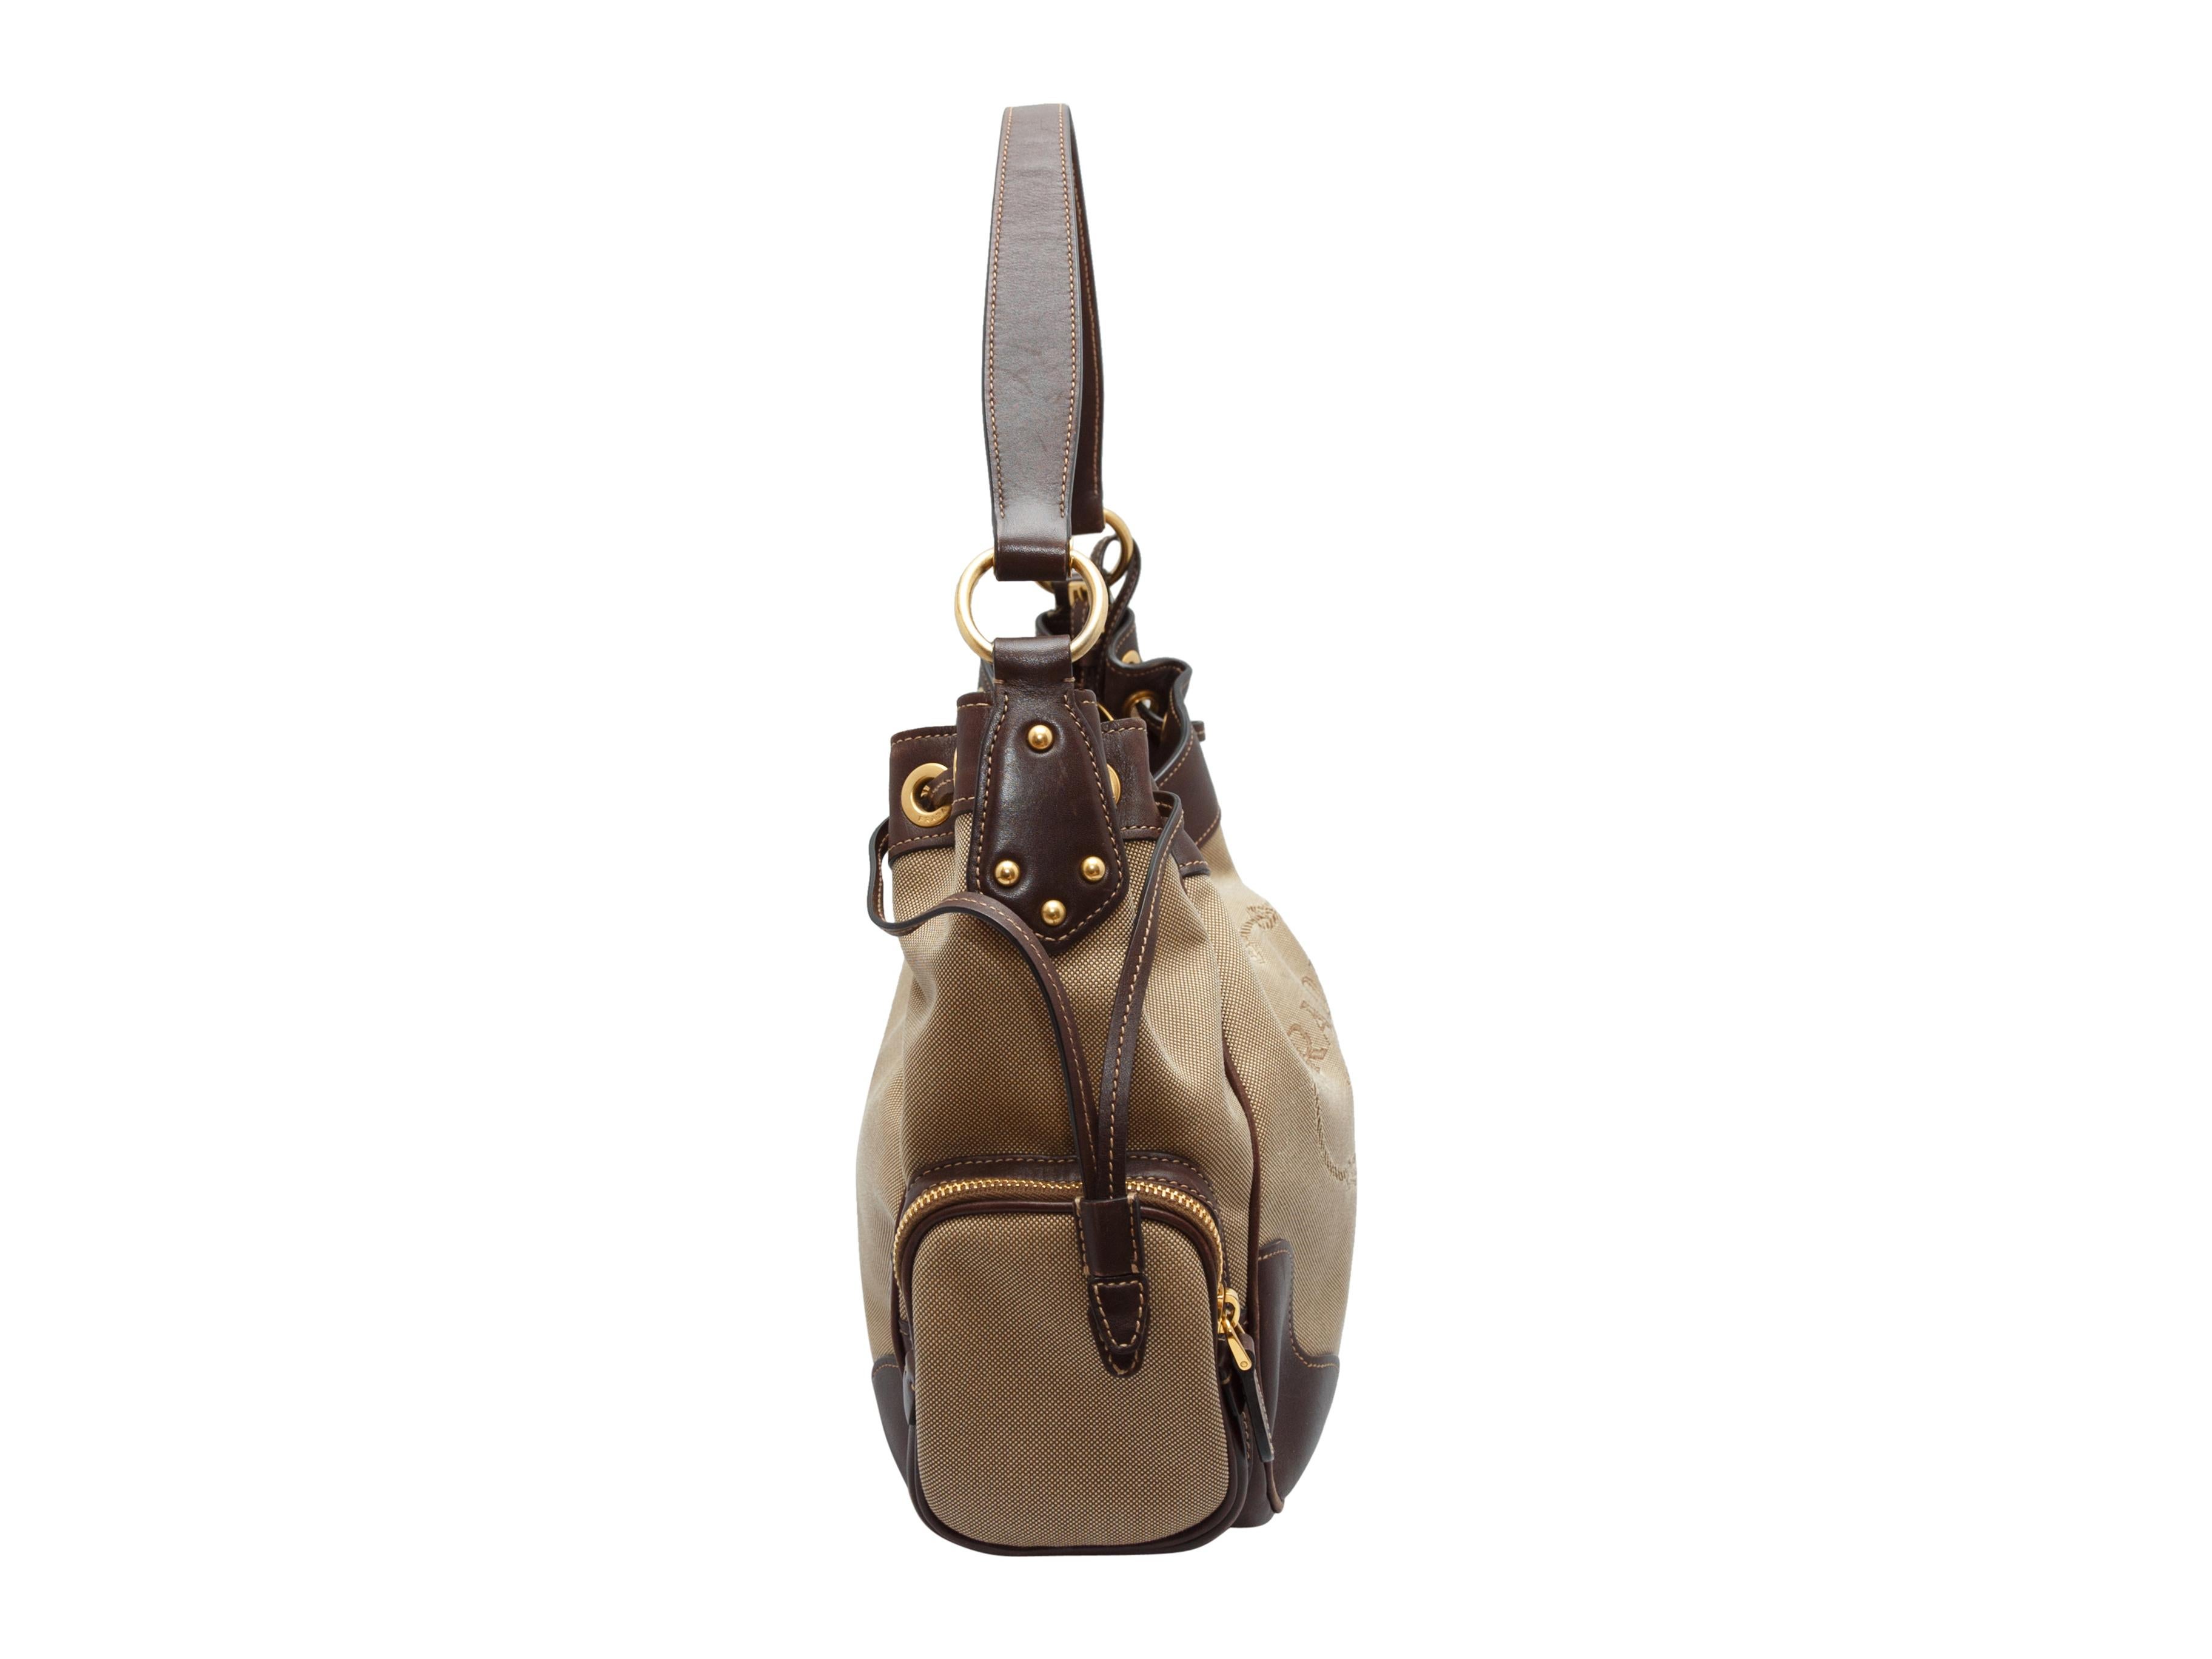 Product details: Tan and brown canvas logo handbag by Prada. Leather trim throughout. Gold-tone hardware. Dual zip pockets at sides. 13